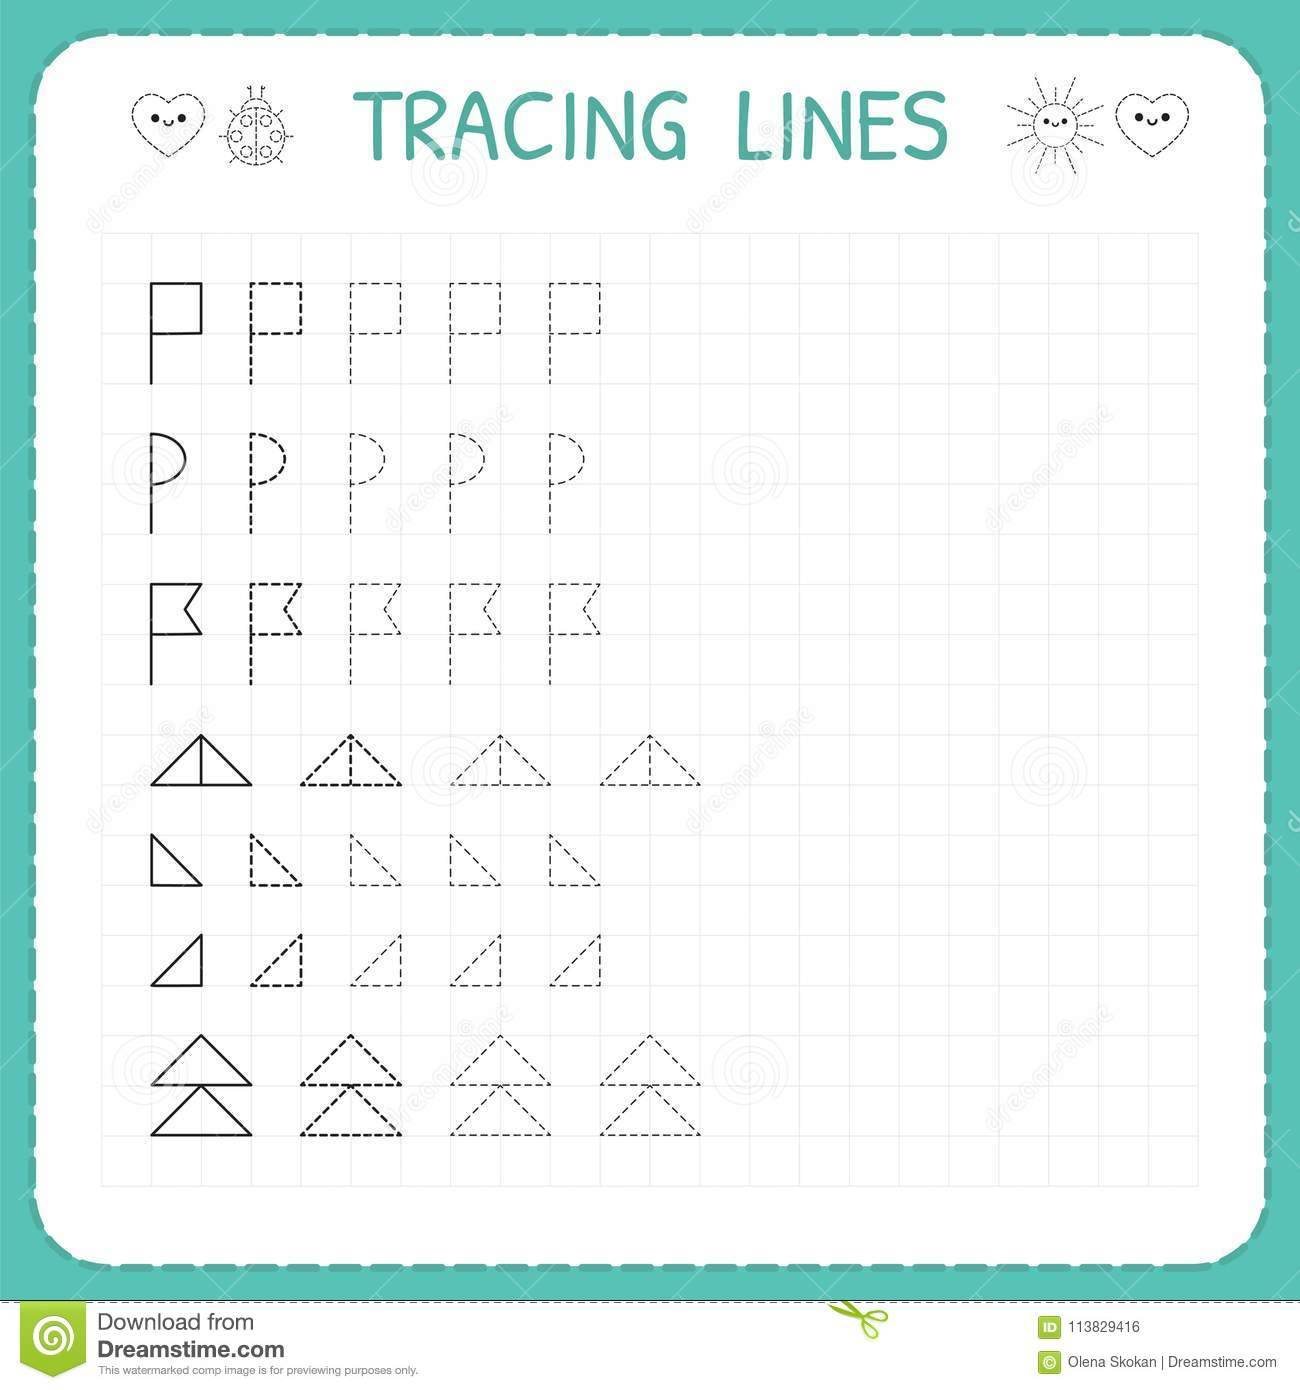 Tracing Lines. Worksheet For Kids. Trace The Pattern. Basic